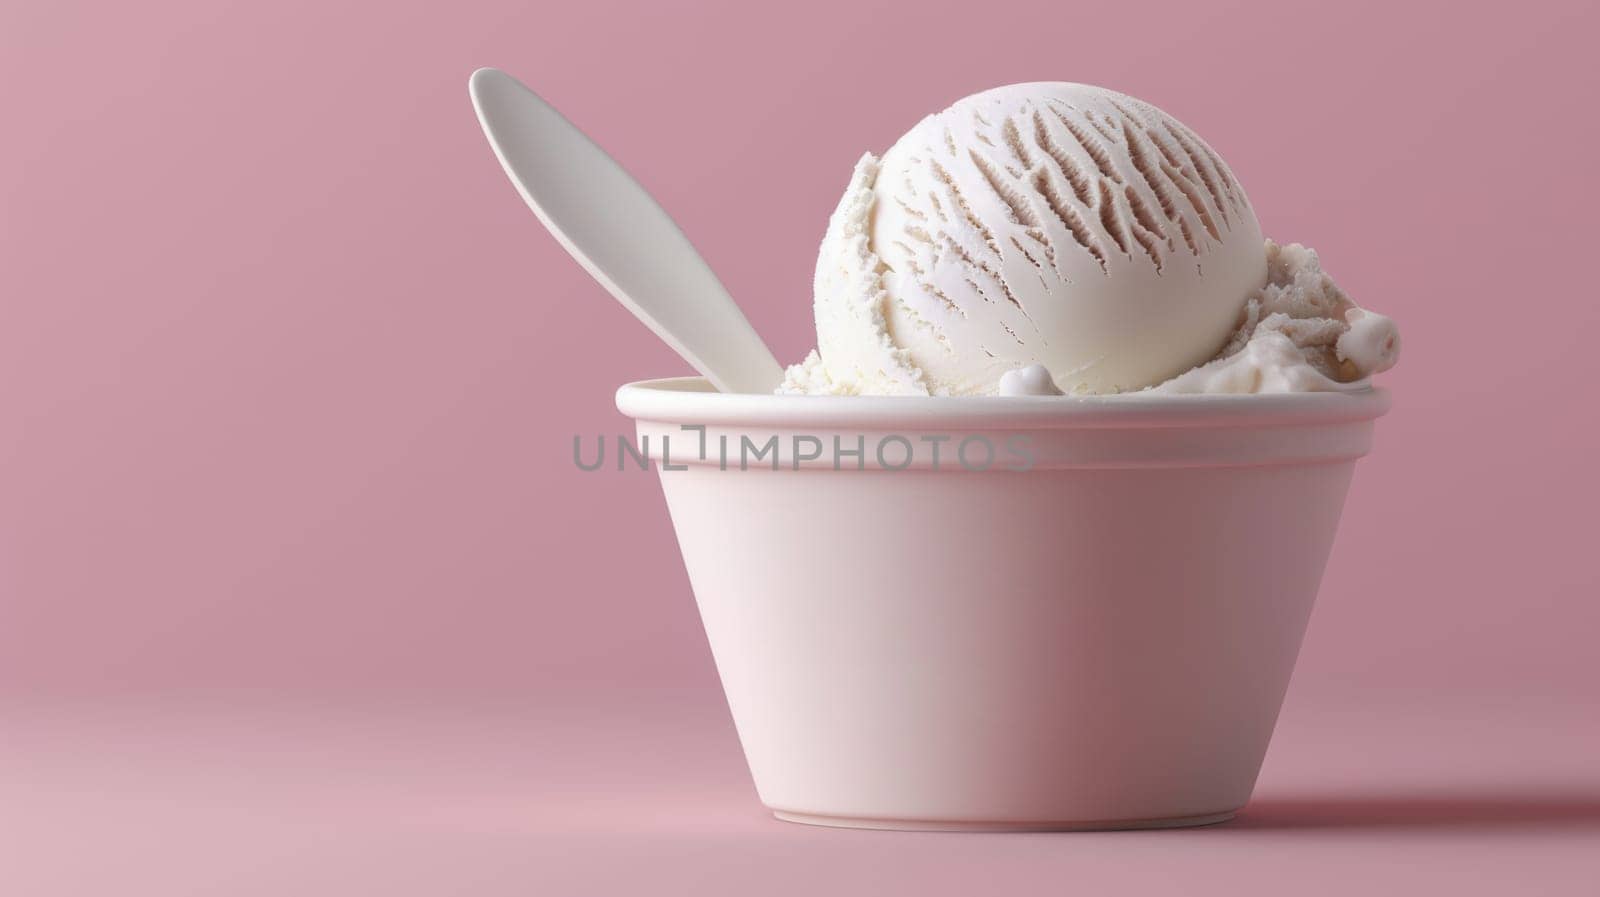 Vanilla ice cream scoop in cup with spoon.